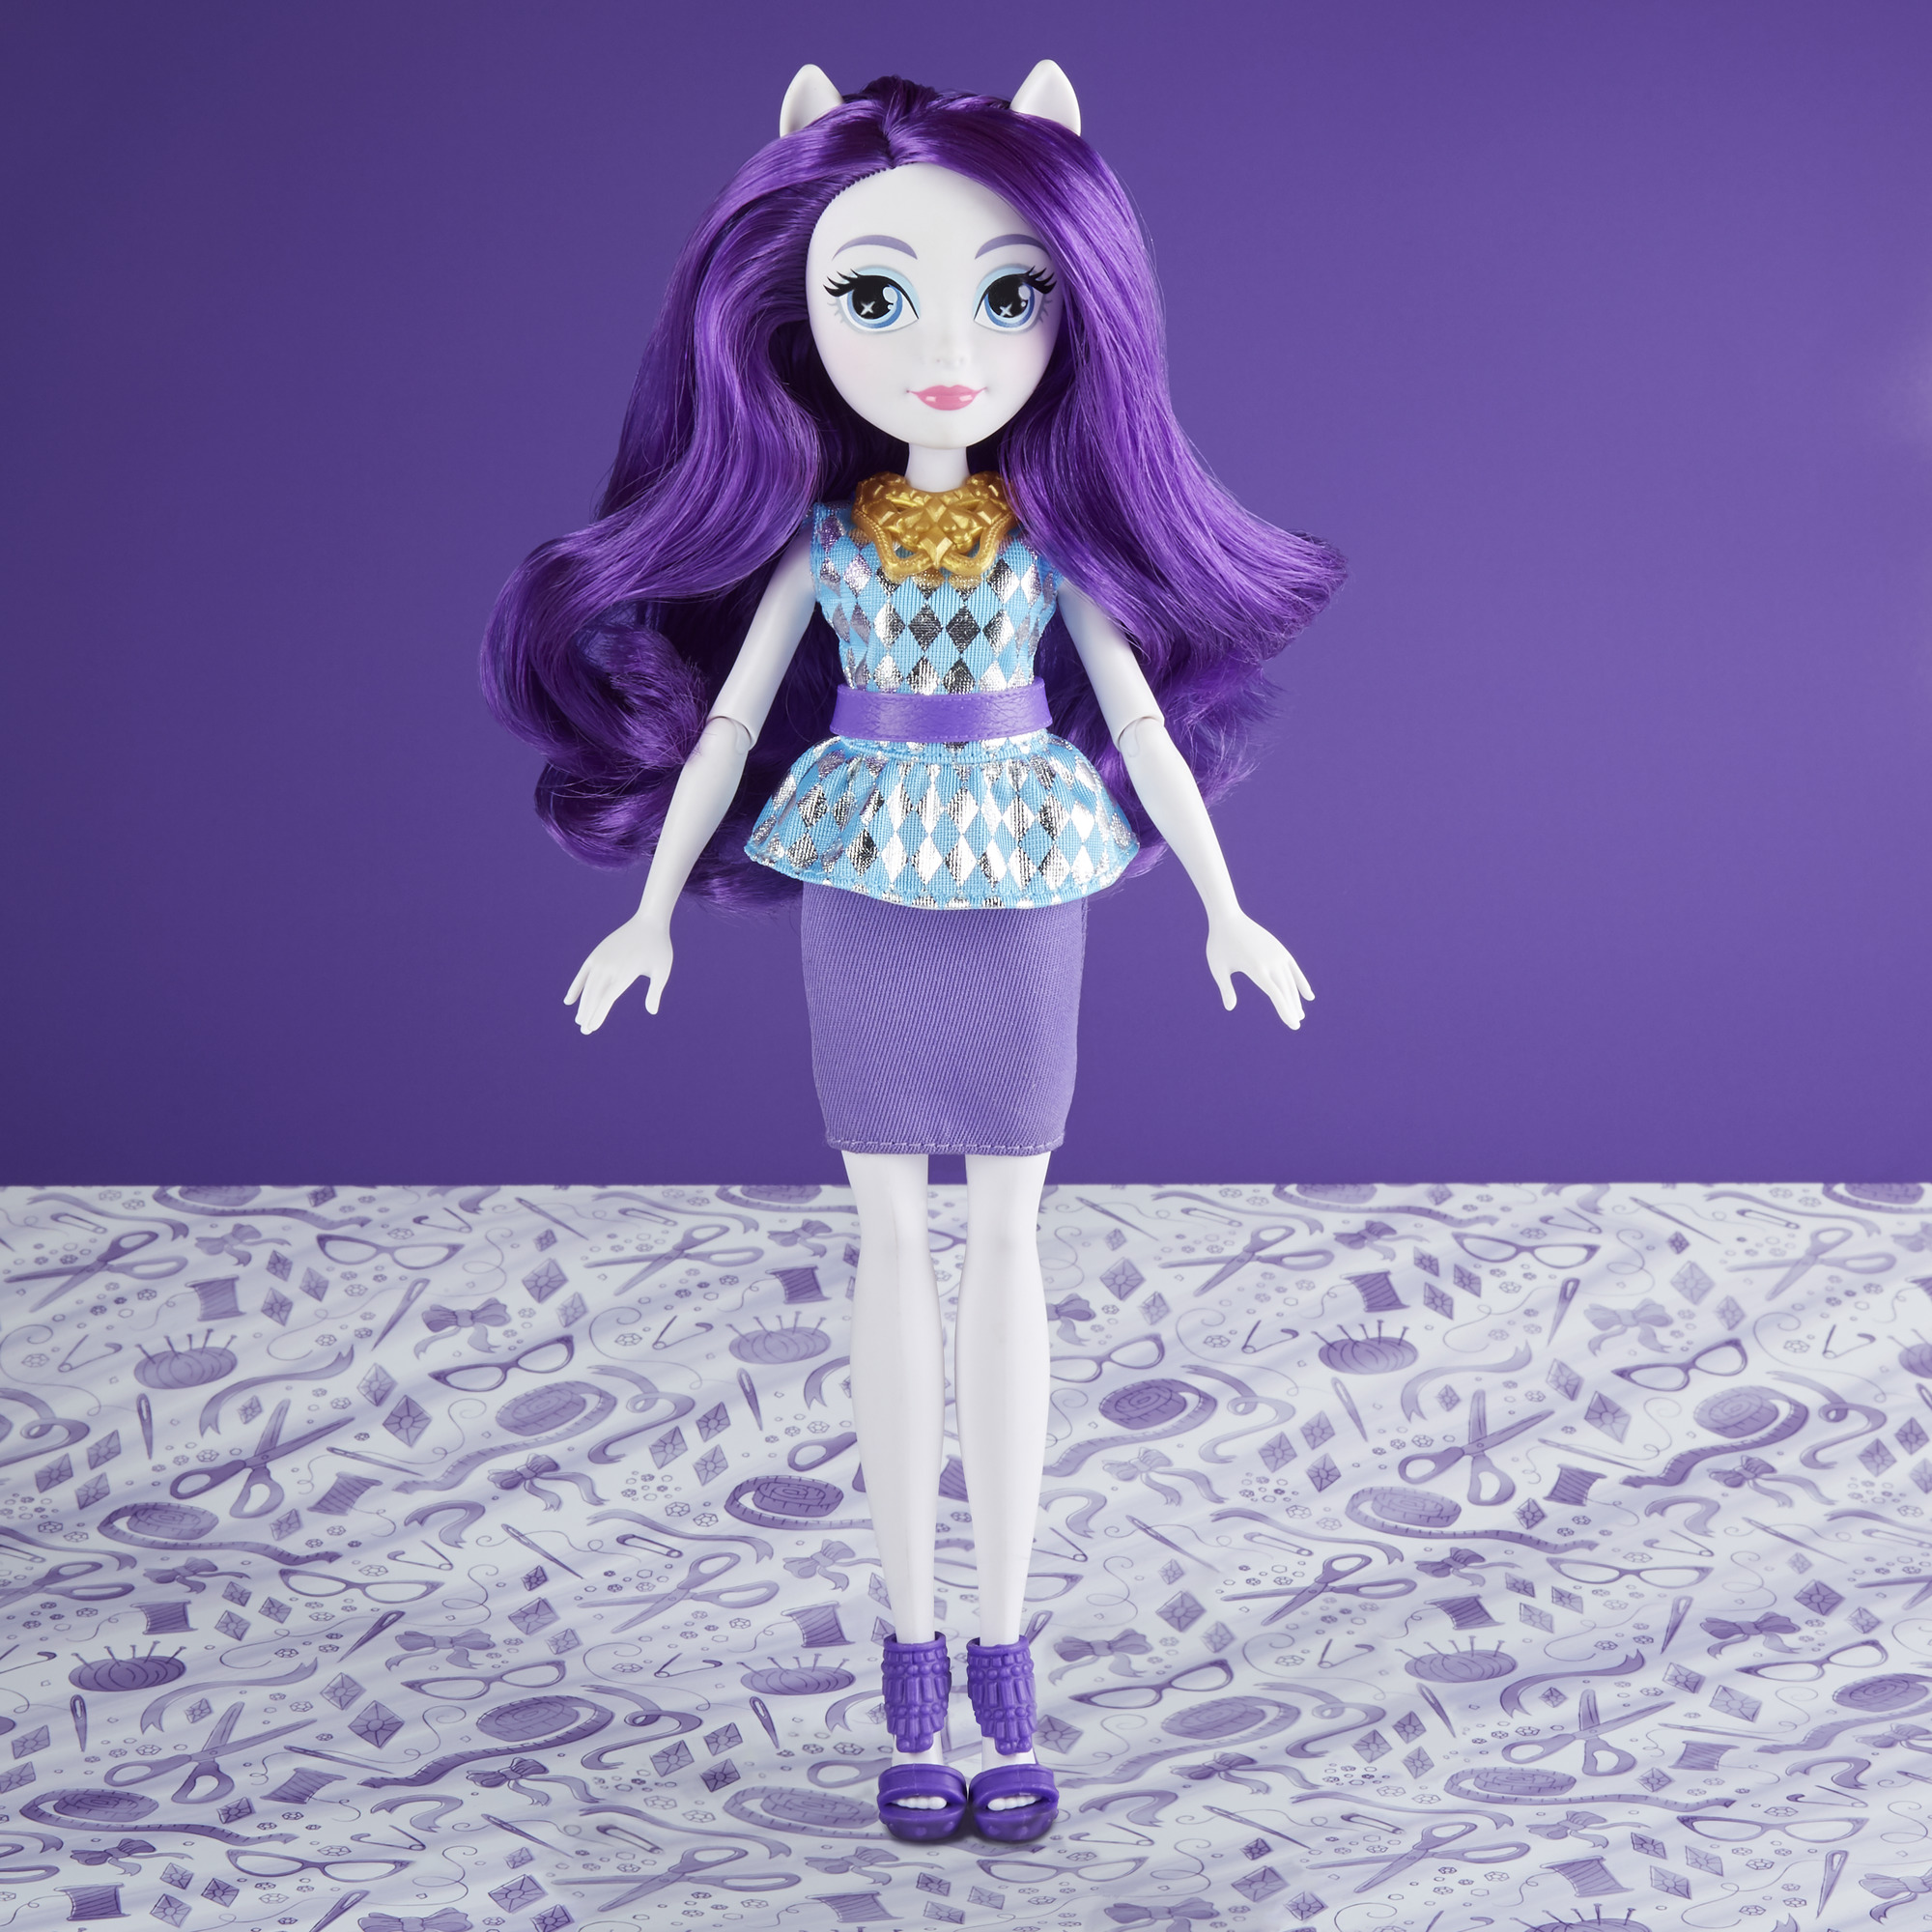 My Little Pony Equestria Girls Rarity Classic Style Doll - image 5 of 9